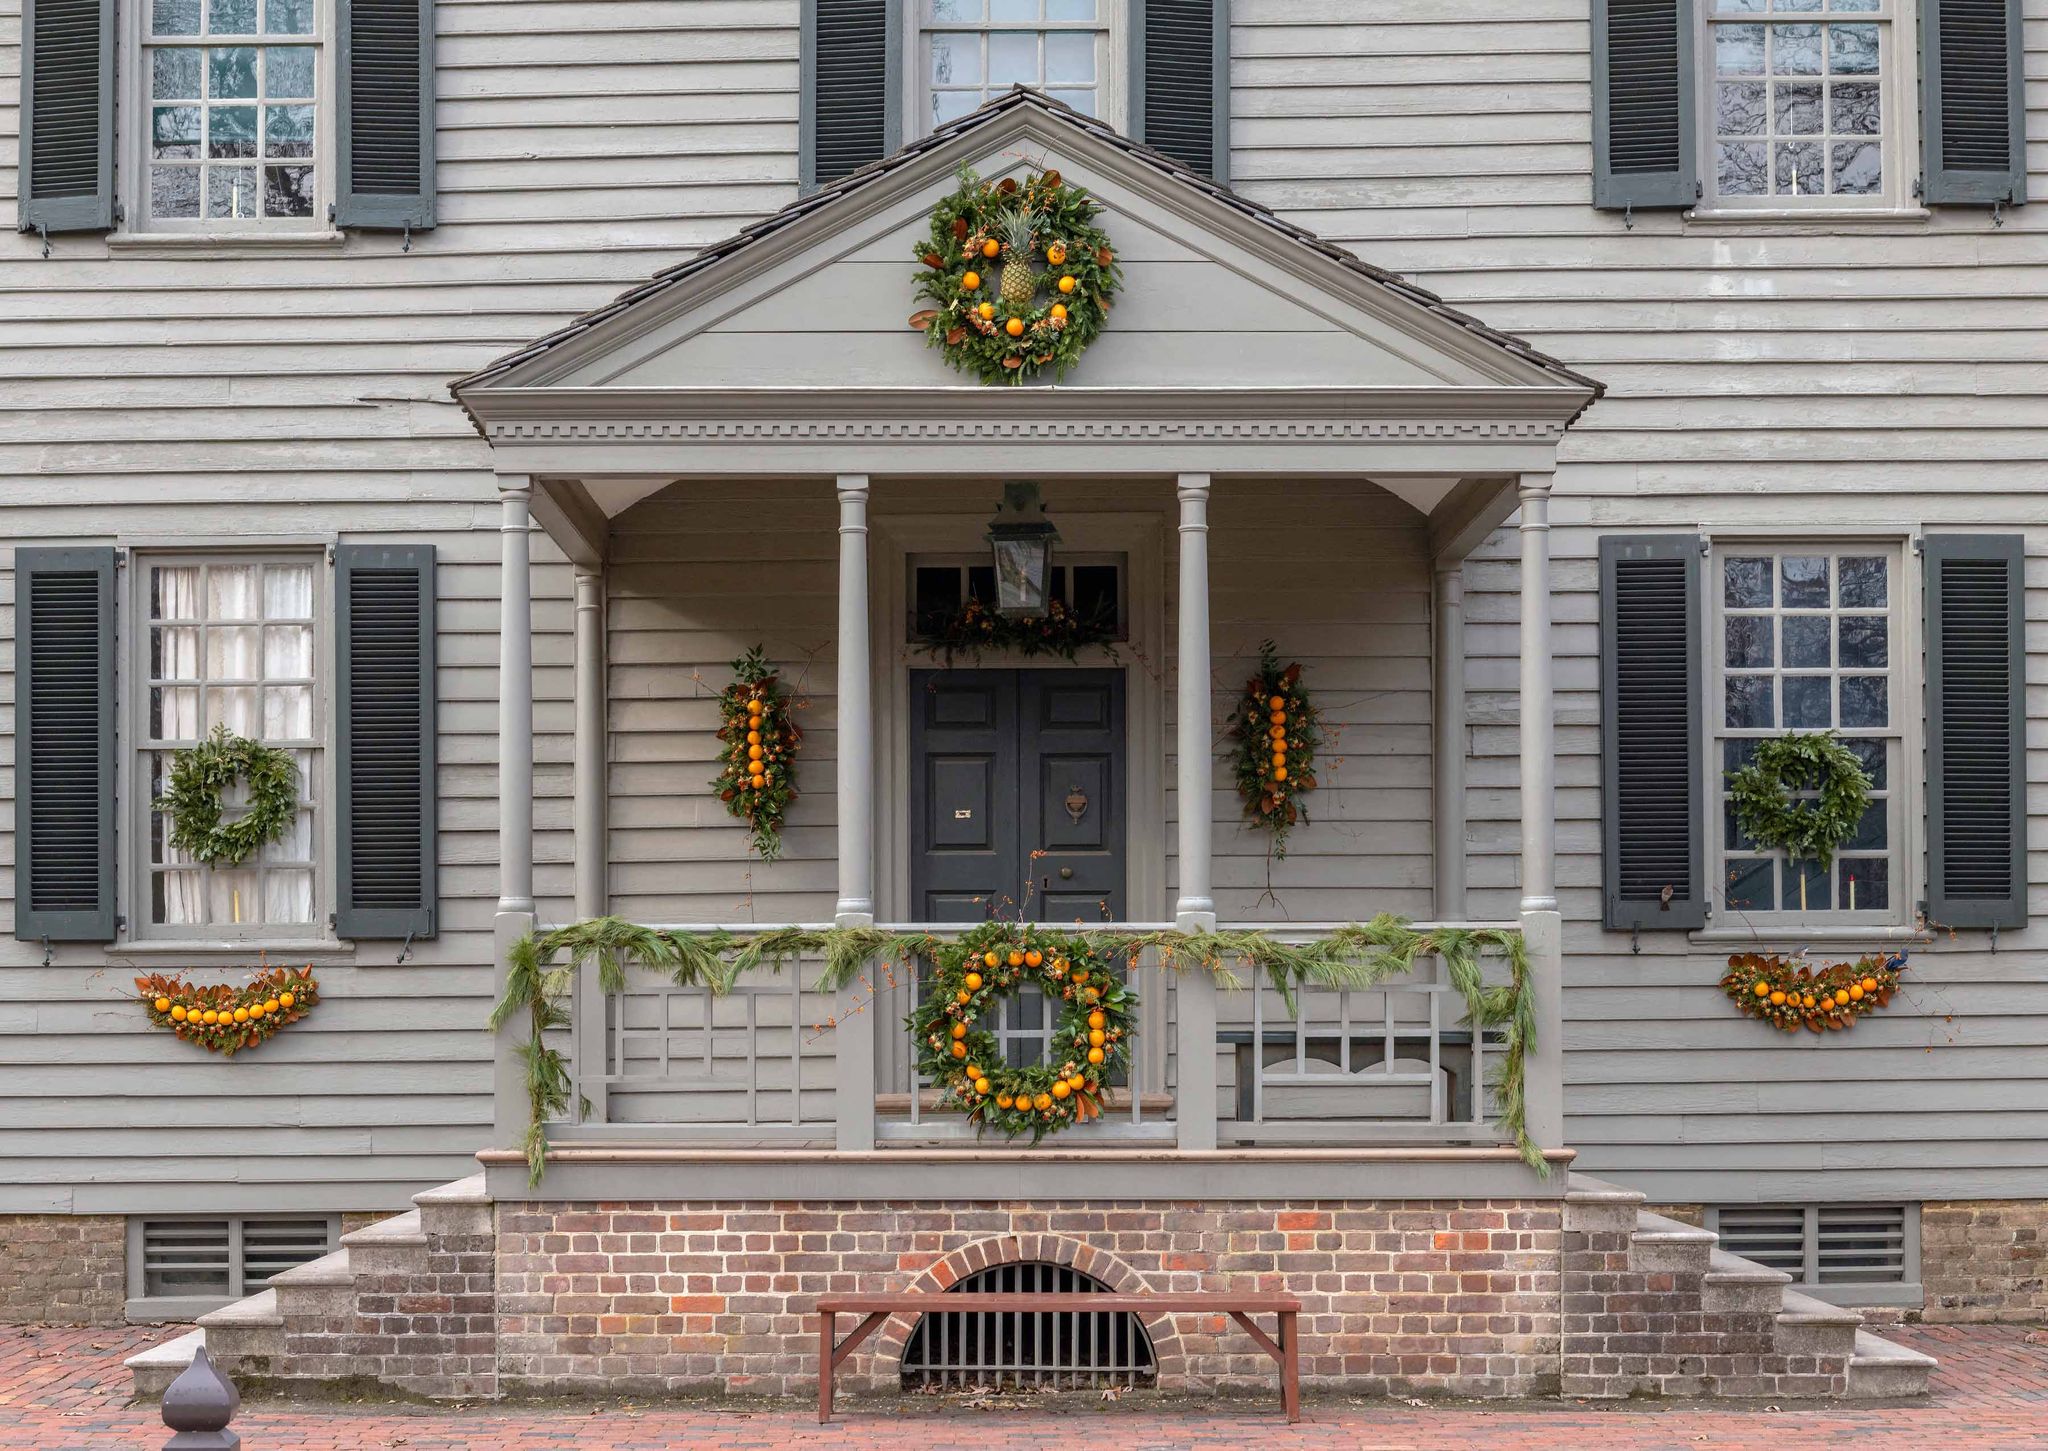 10 Vintage-Inspired Wreath Designs for an Old-Fashioned Holiday